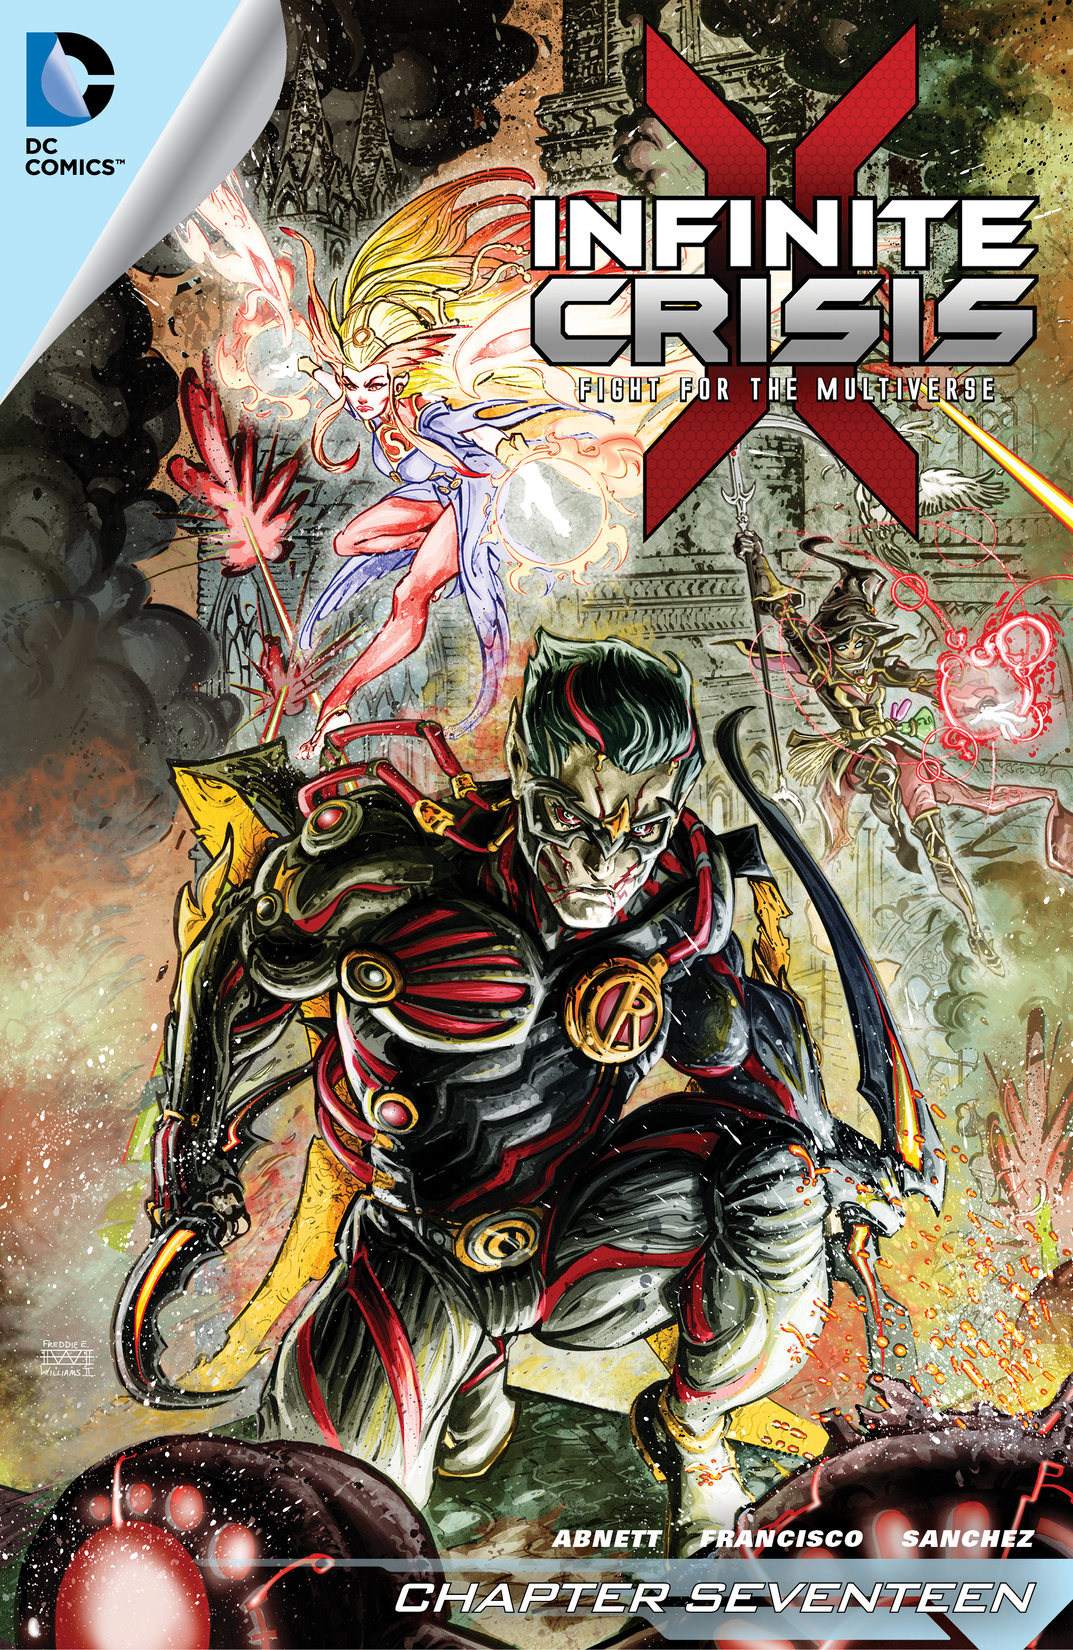 Infinite Crisis: Fight for the Multiverse #17 preview images